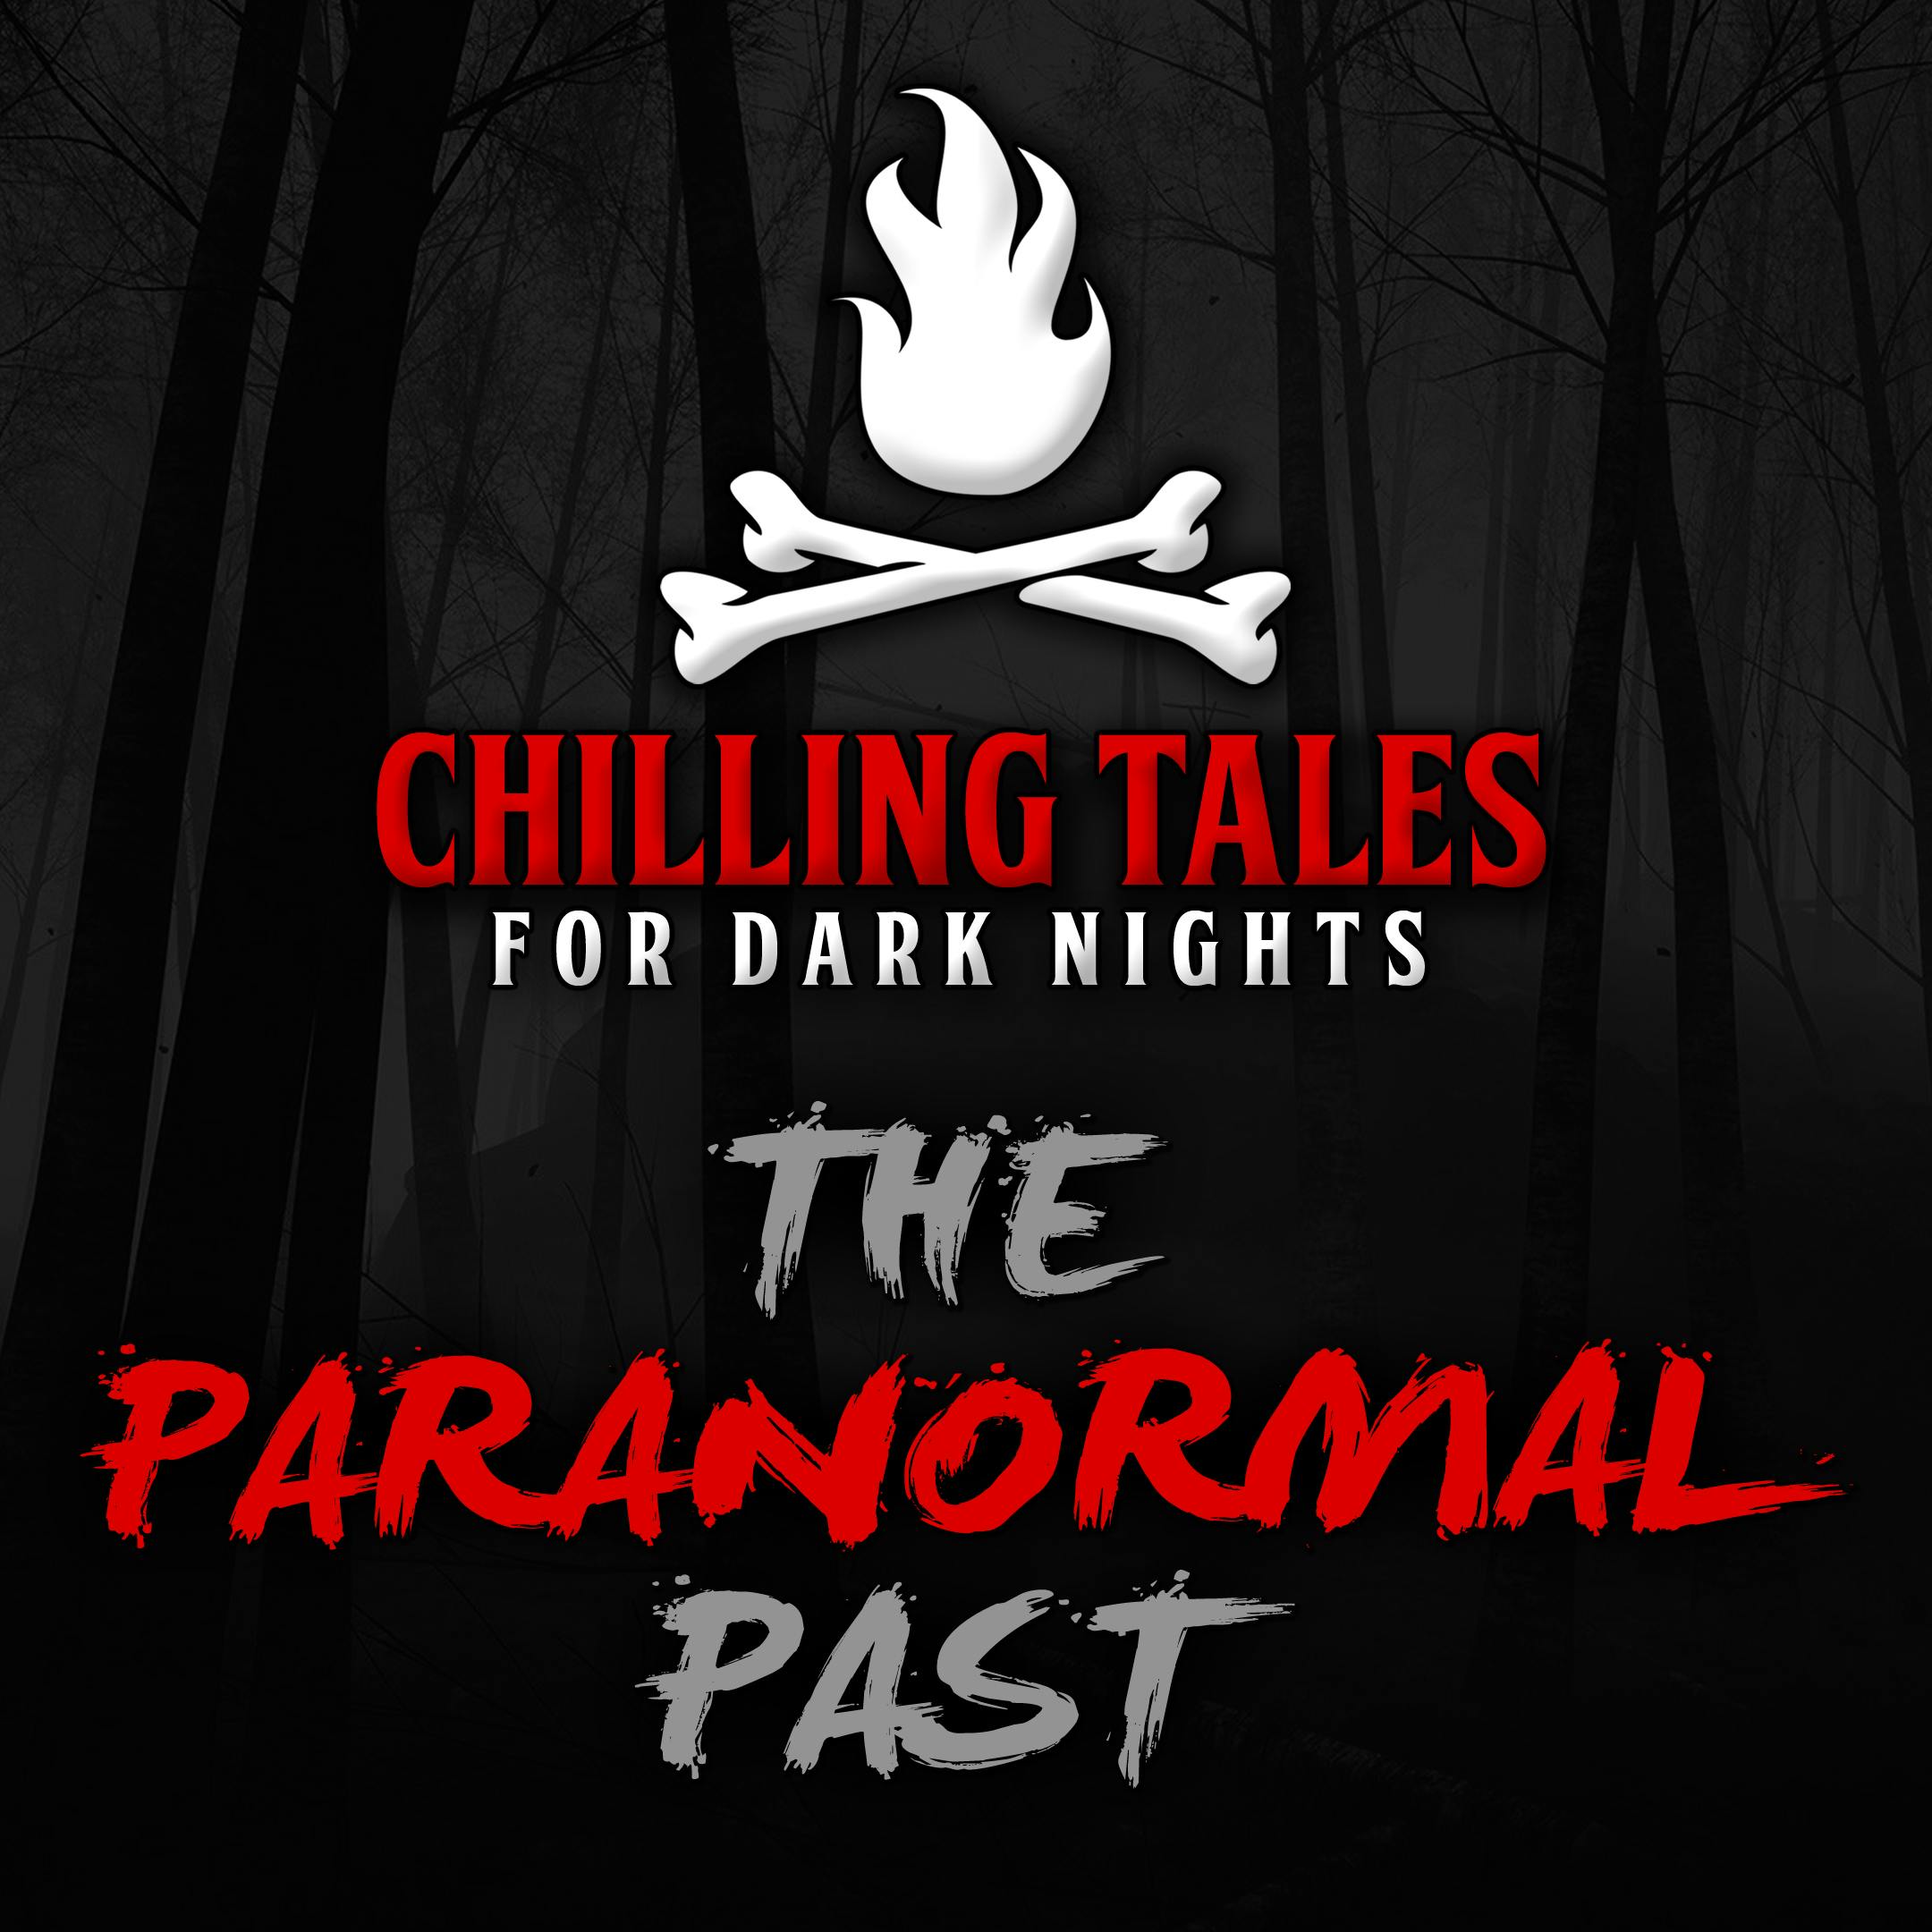 76: The Paranormal Past – Chilling Tales for Dark Nights